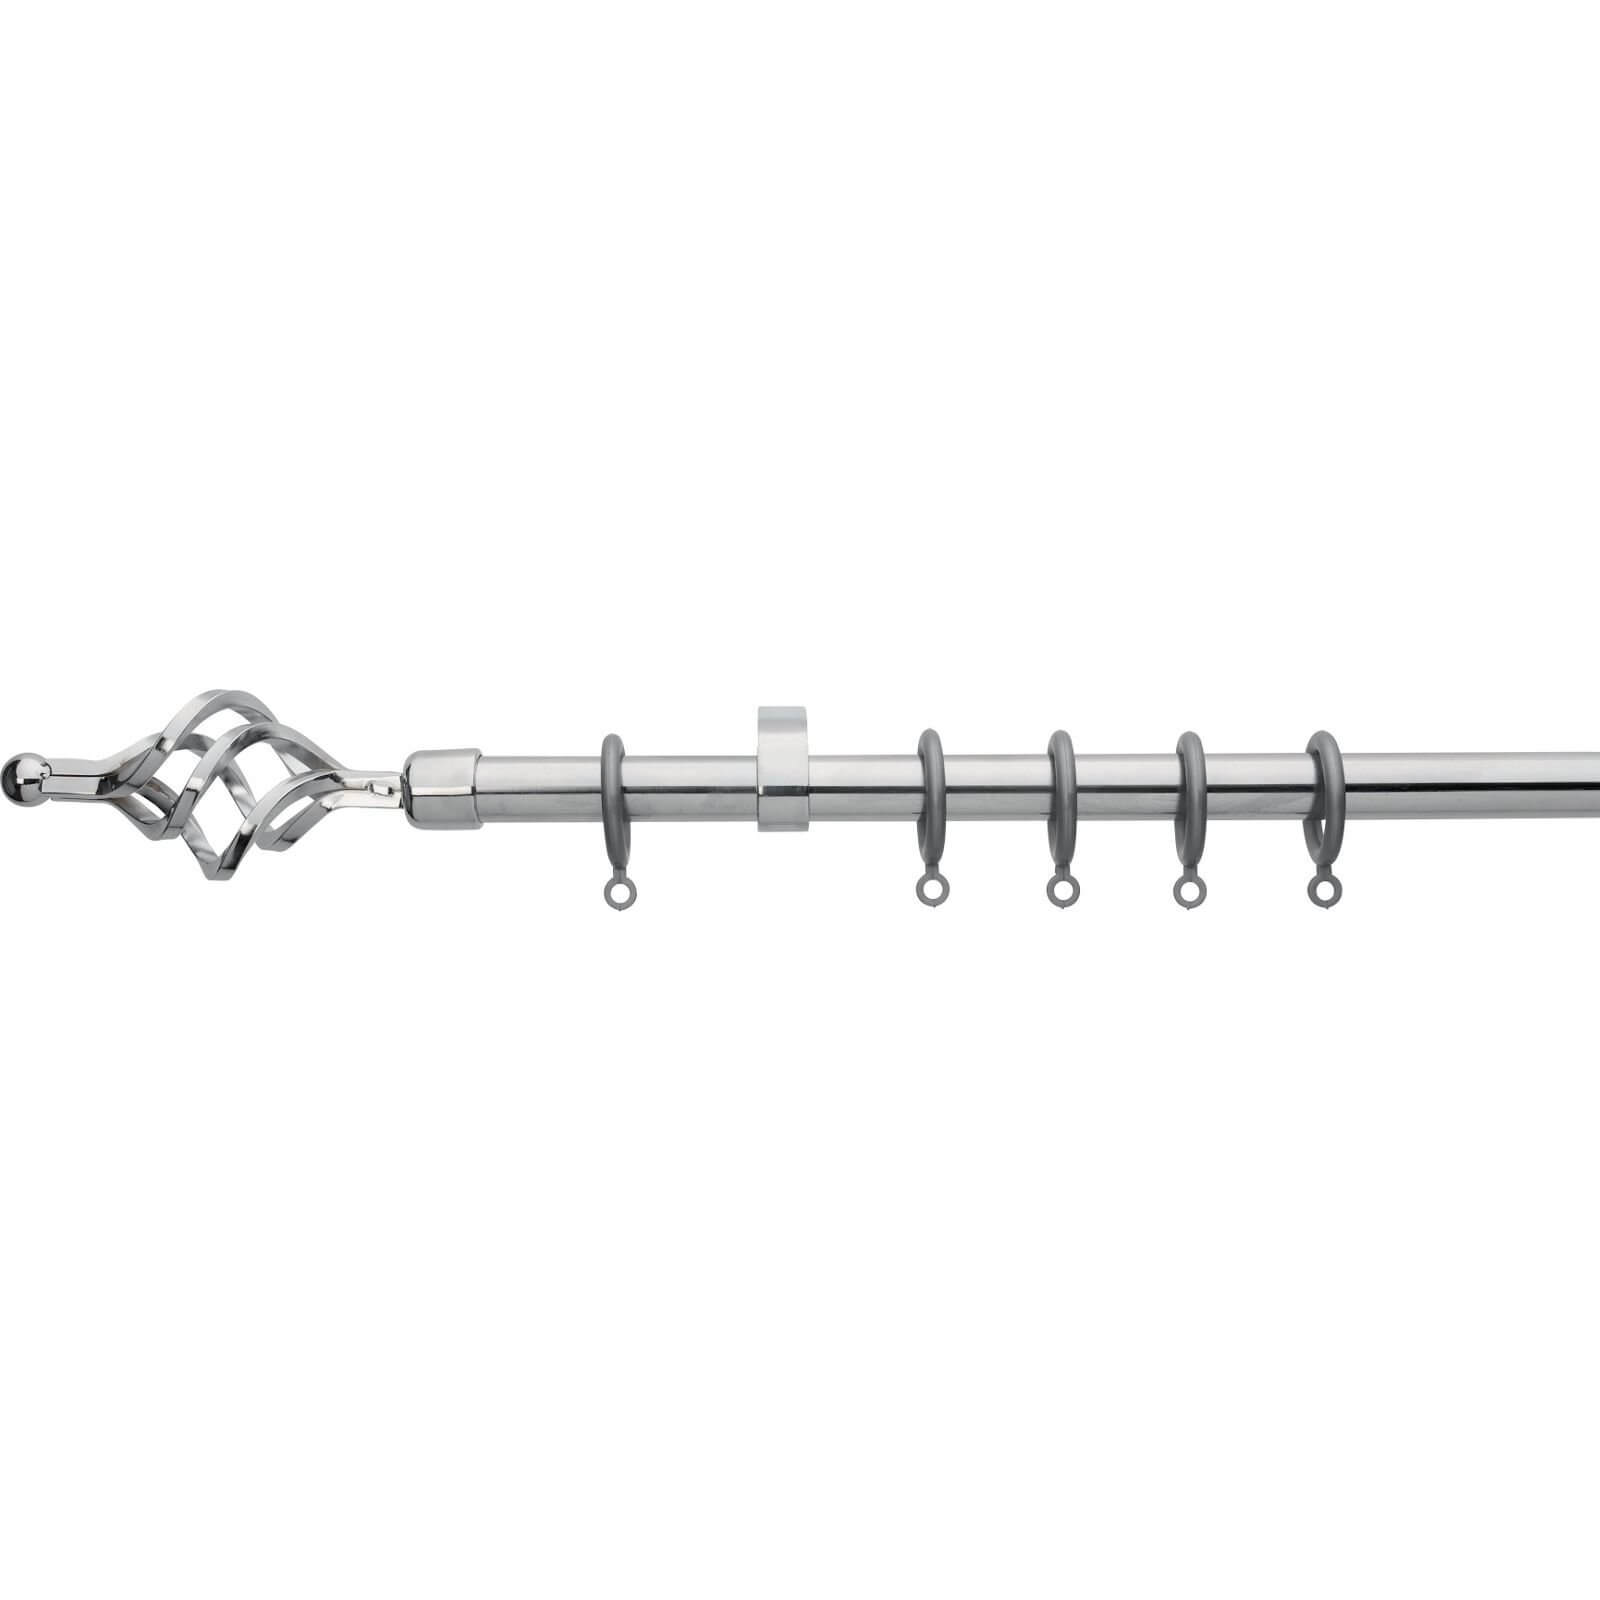 Chrome Extendable Curtain Pole with Cage Finial 1.7 - 3m